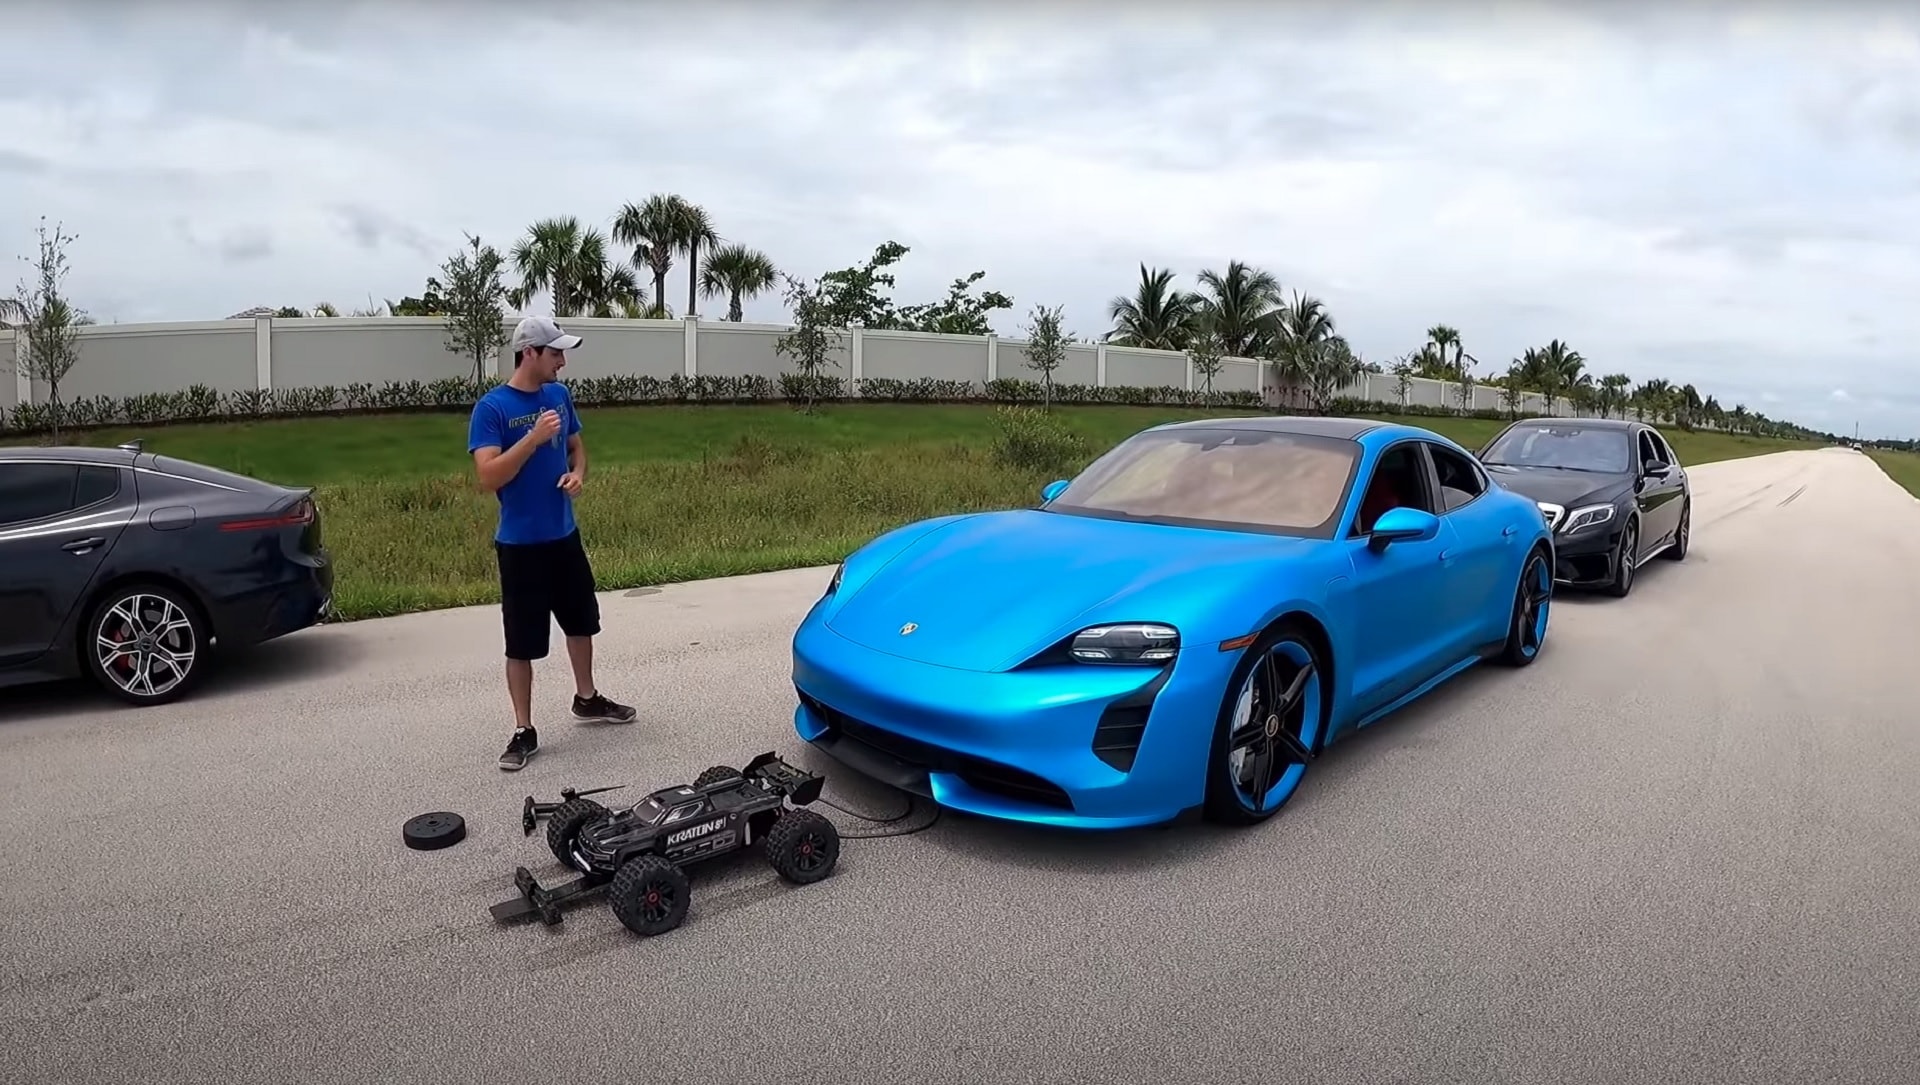 https://s1.cdn.autoevolution.com/images/news/meet-colossus-the-rc-car-that-can-tow-a-porsche-taycan-and-an-s63-amg-at-once-164178_1.jpg